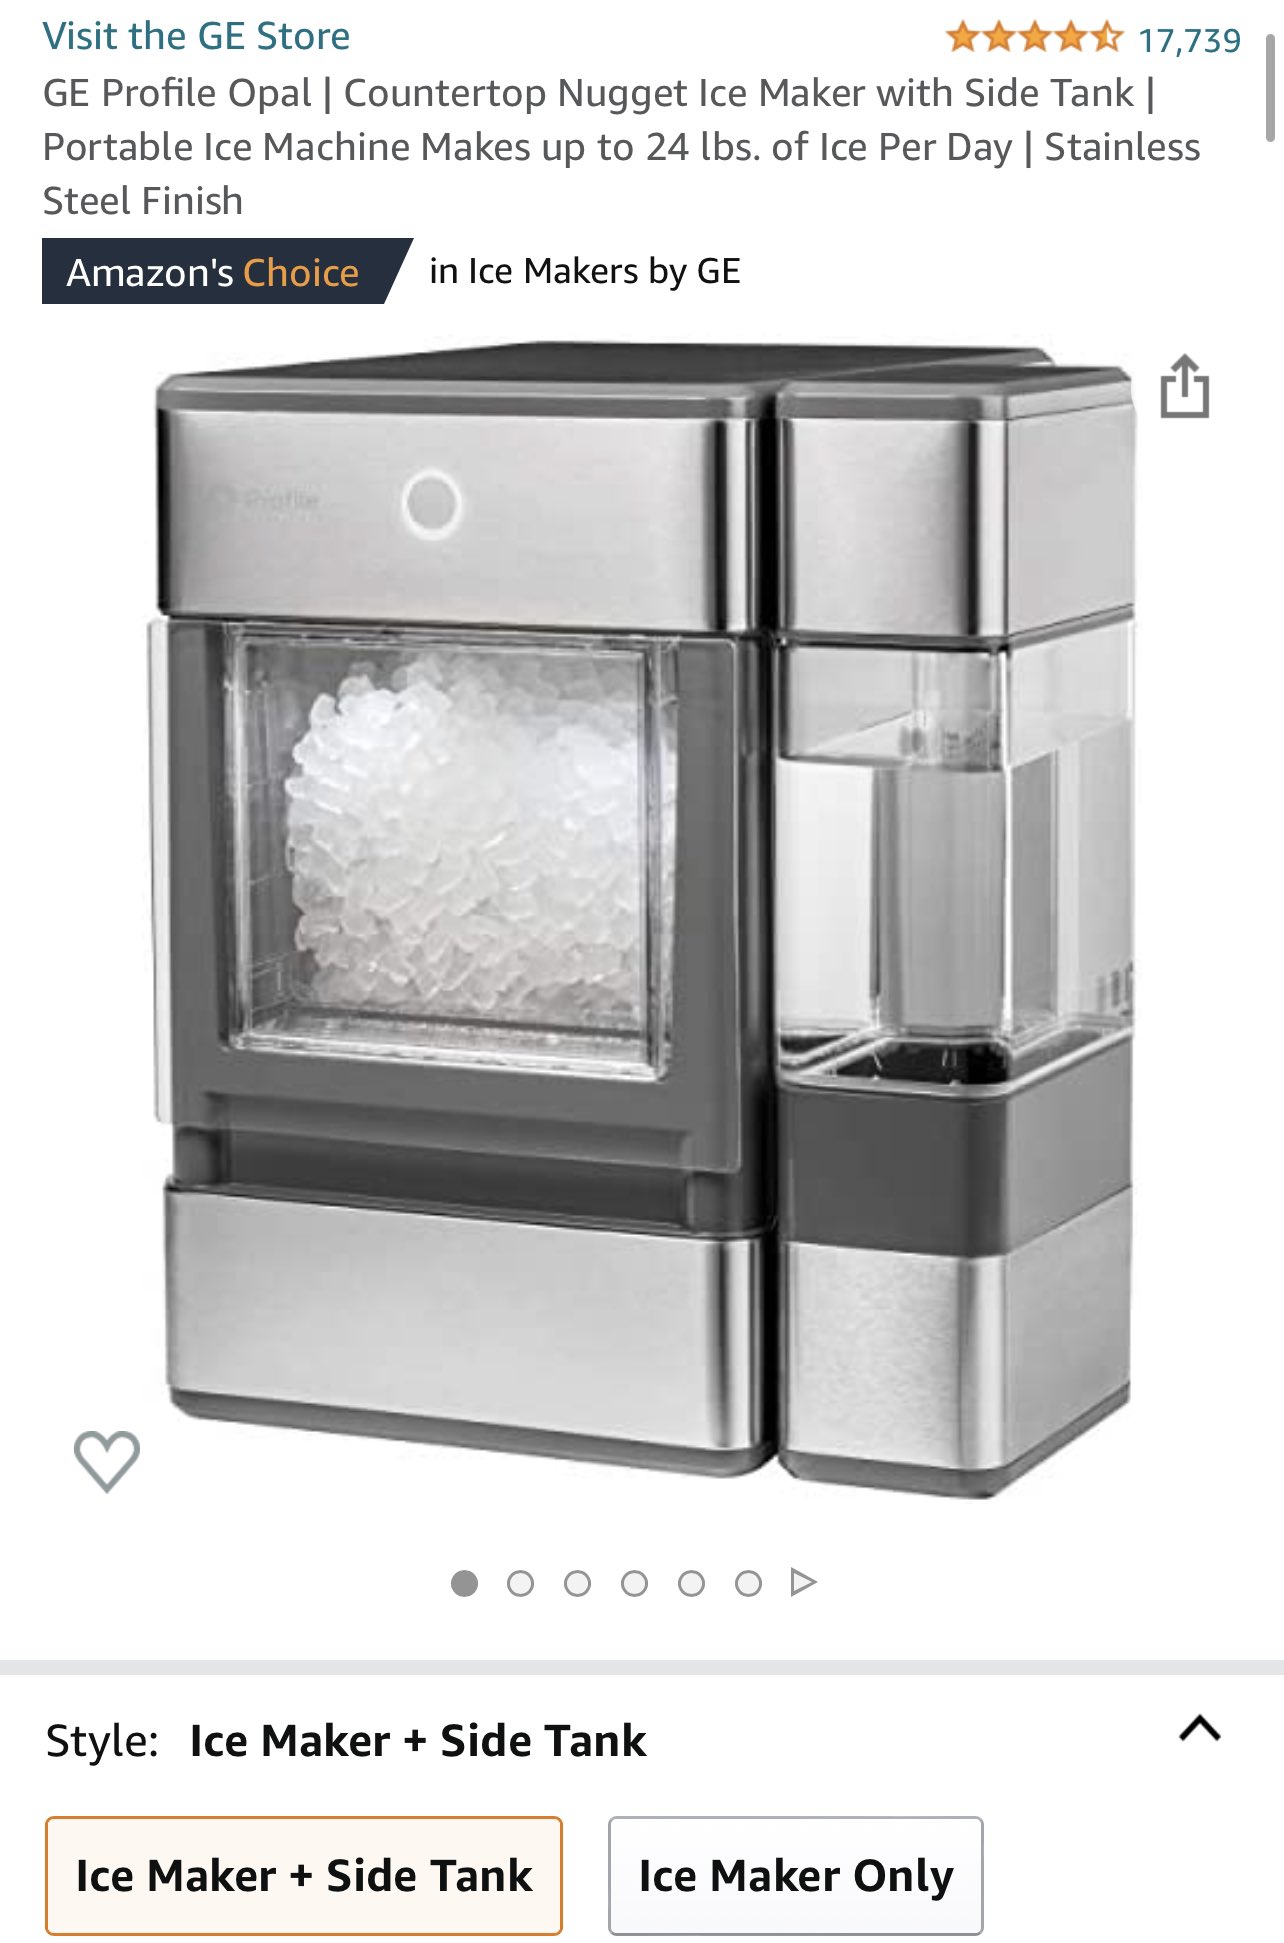 Jersey Jerry on X: If anyone is looking for an ice machine I